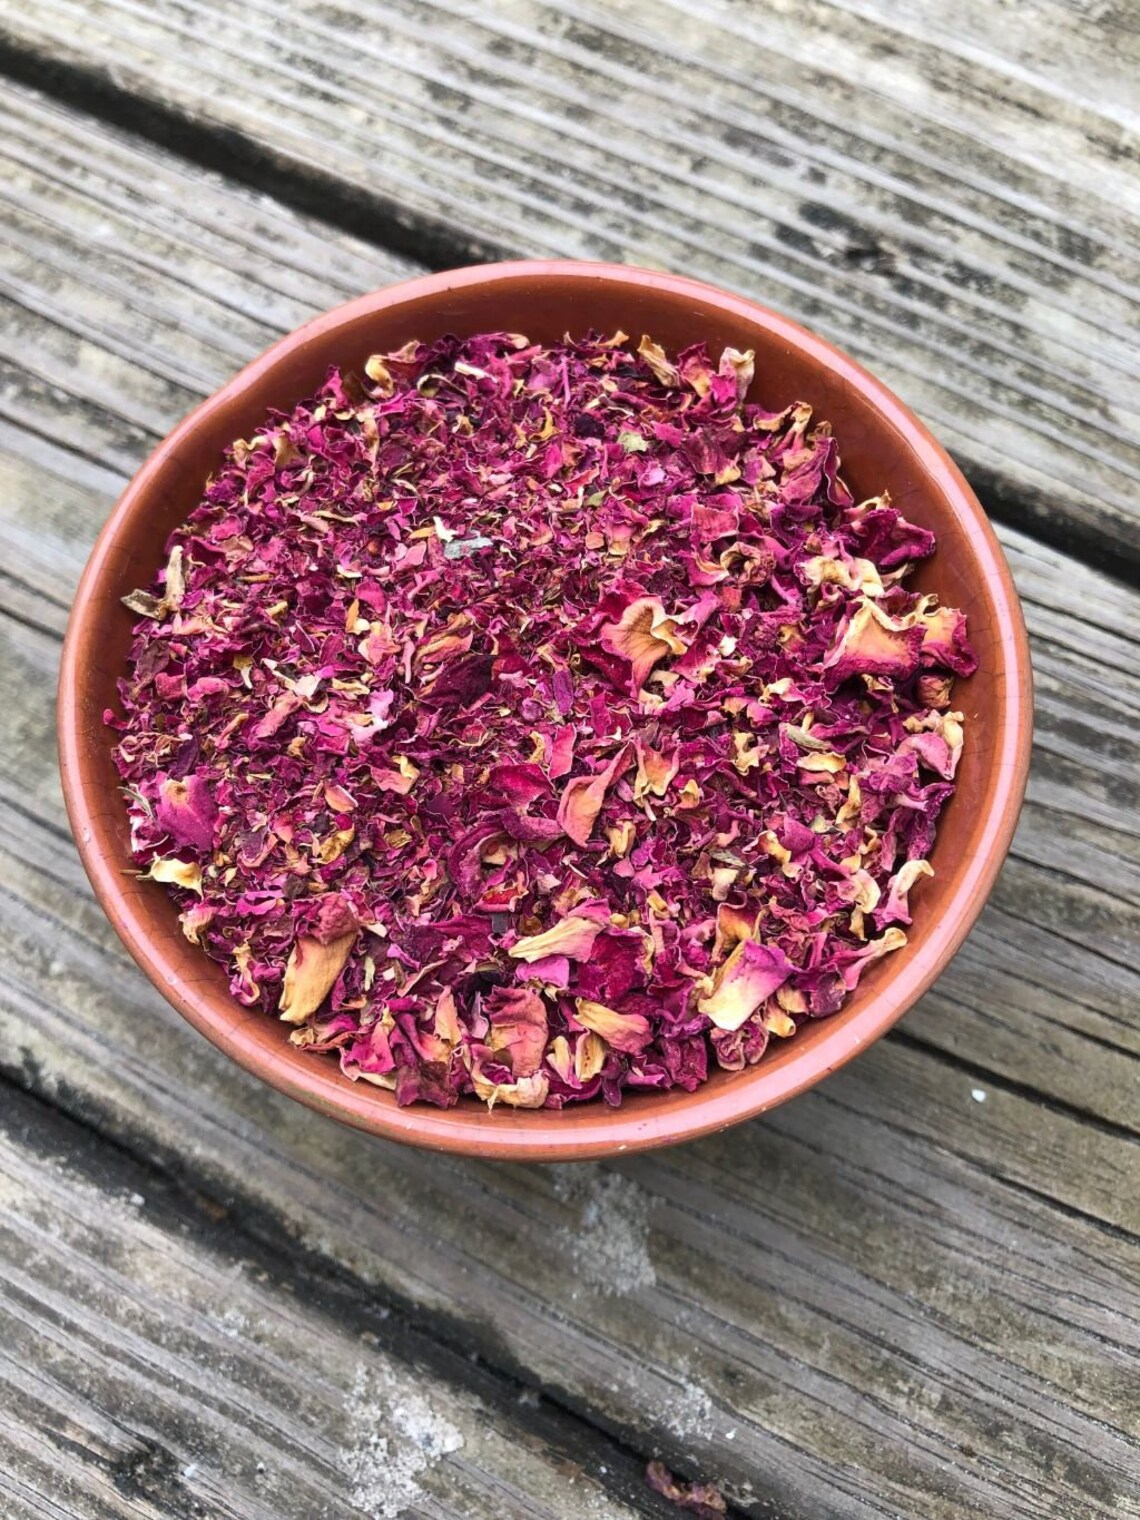 Red Rose Petals Crushed - ORGANIC - 1 ounce